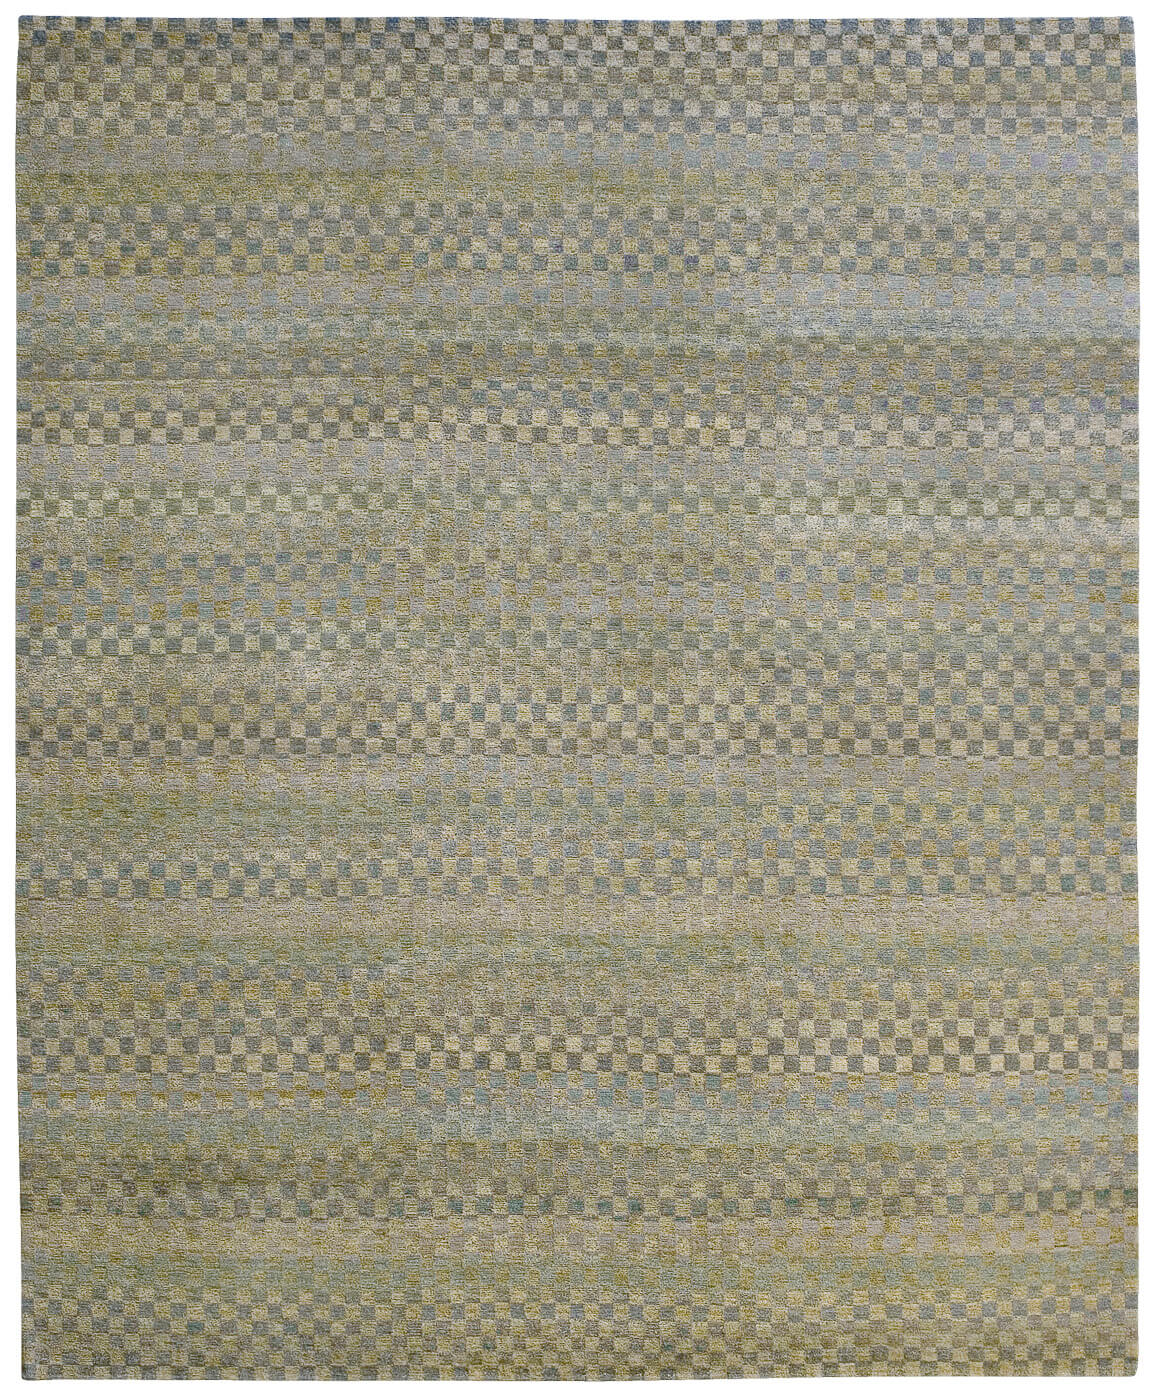 Hand-woven Checkered Luxury Rug ☞ Size: 300 x 400 cm